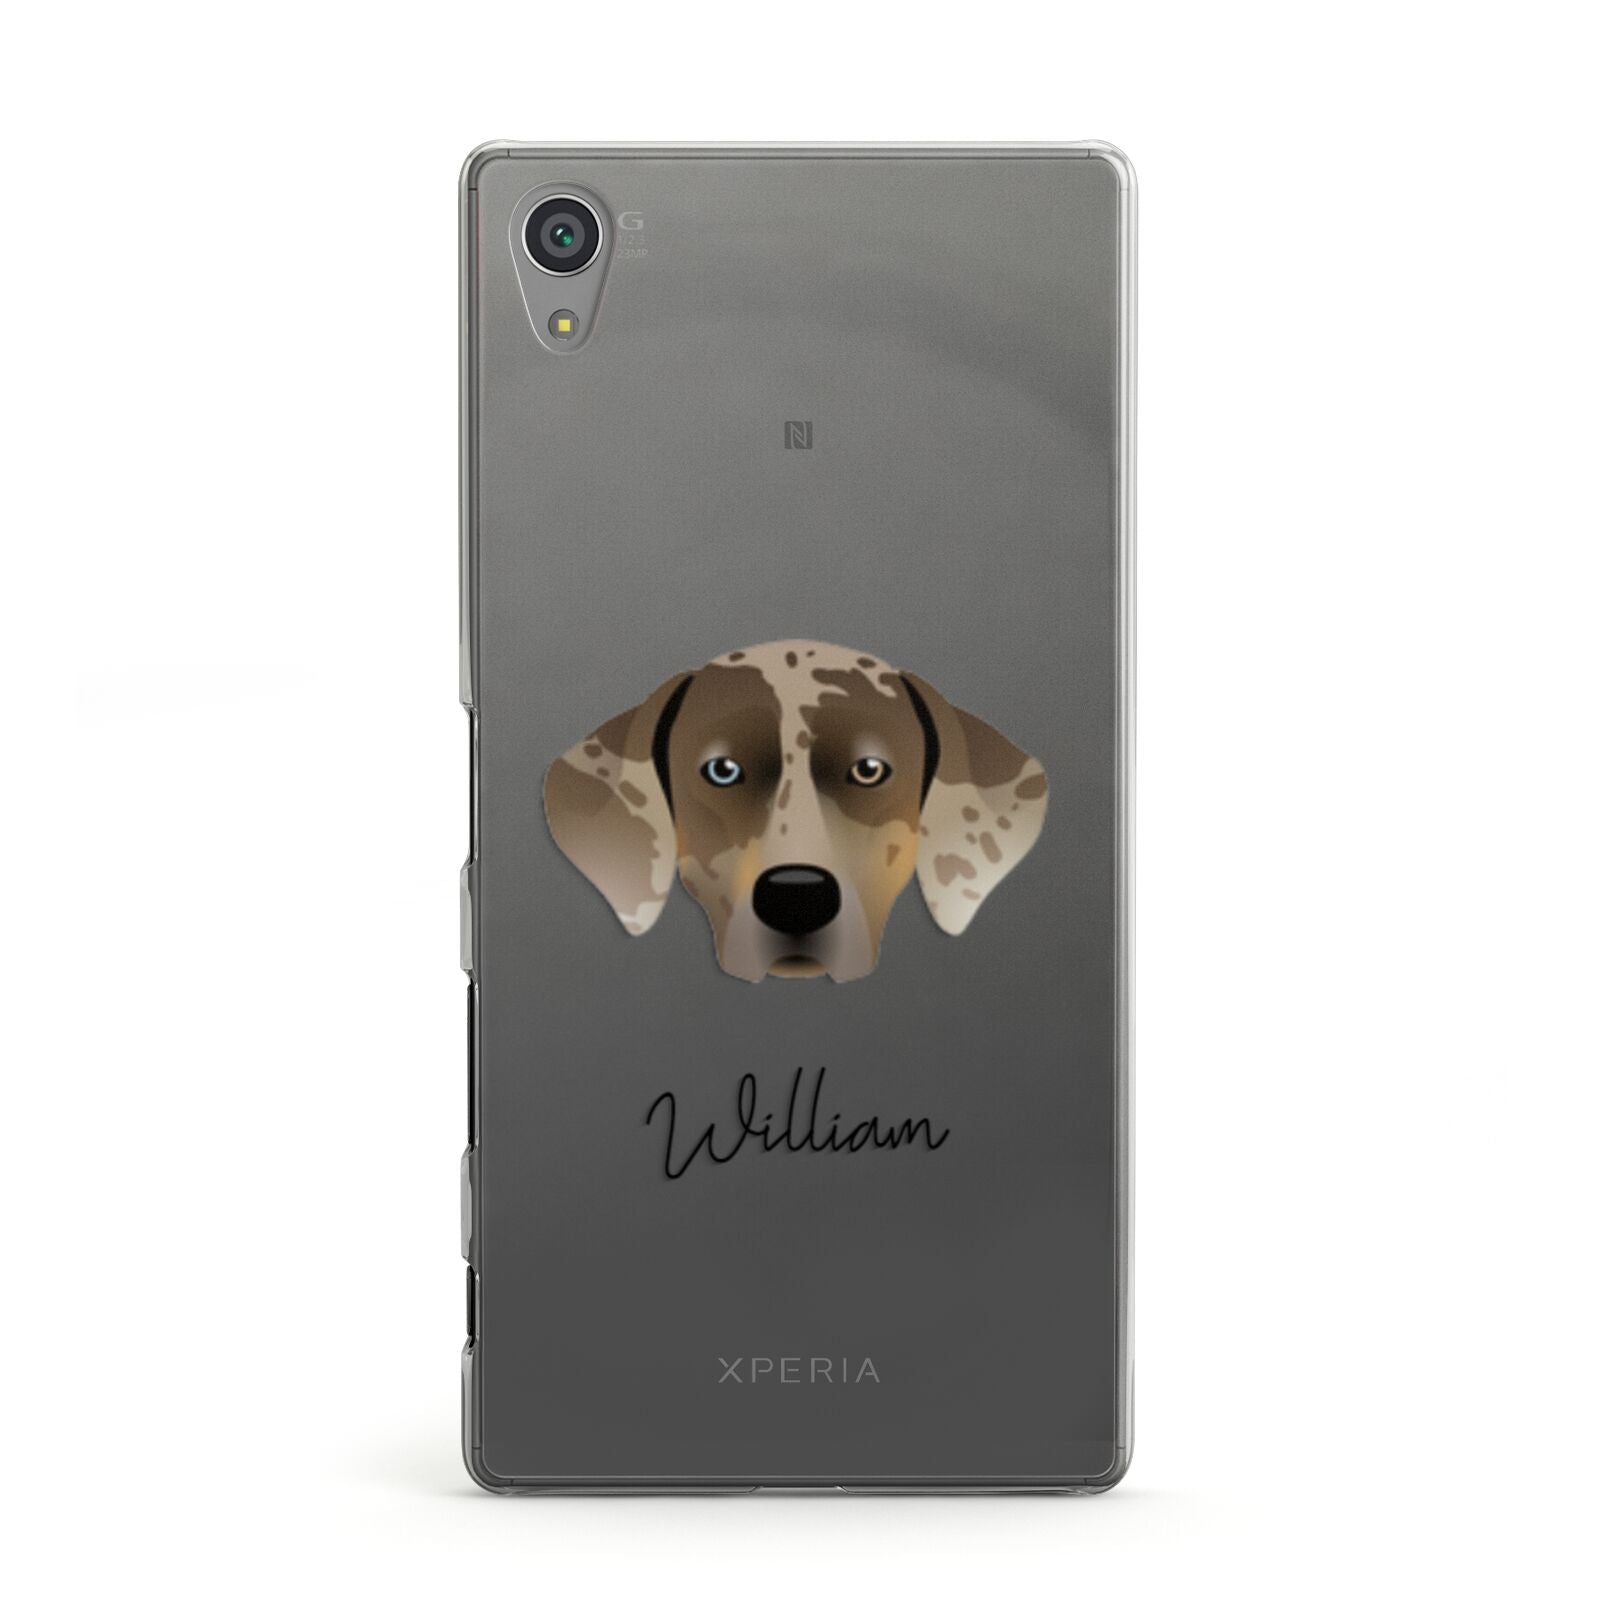 Catahoula Leopard Dog Personalised Sony Xperia Case